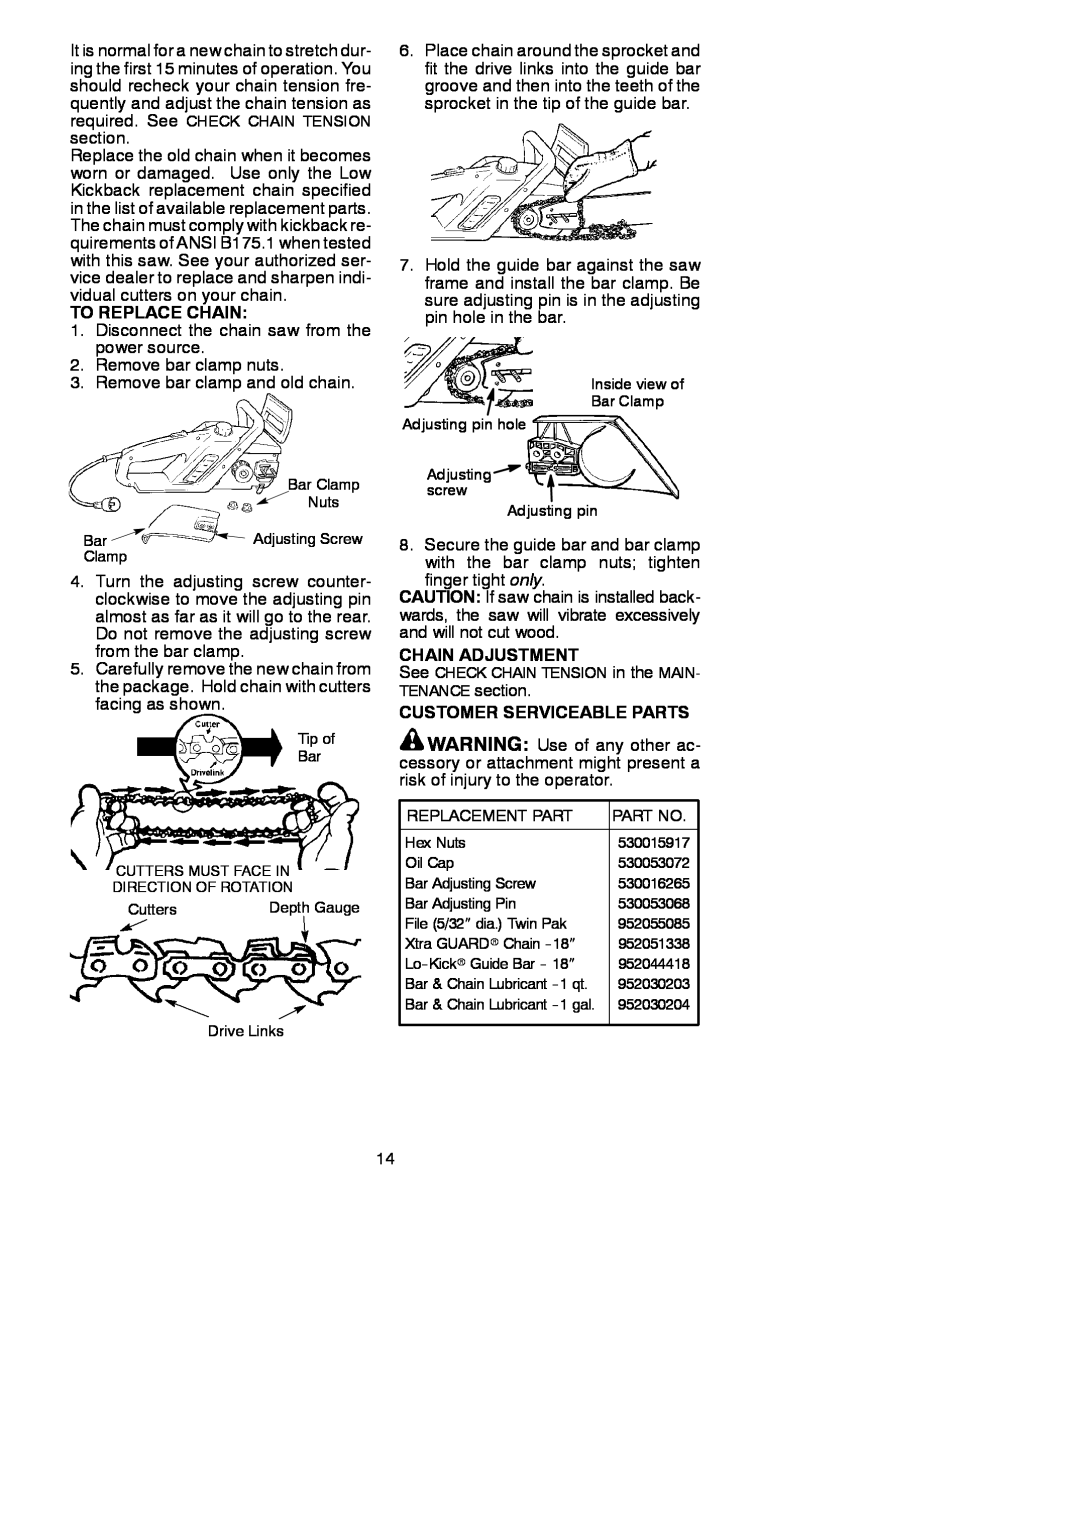 Poulan 545117548 instruction manual To Replace Chain, Chain Adjustment, Customer Serviceable Parts 